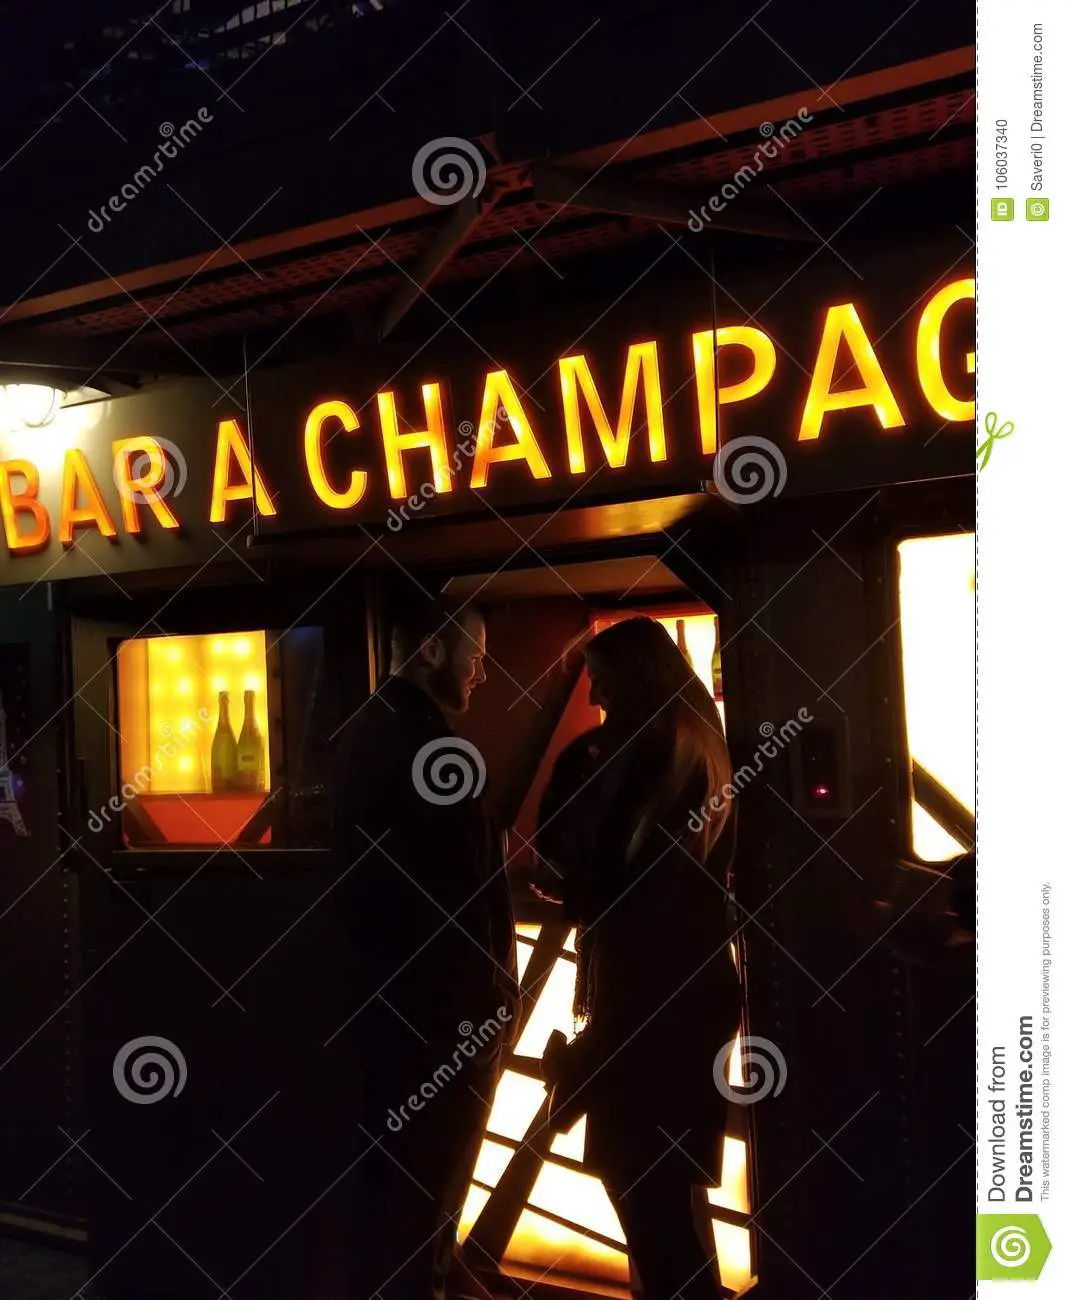 Champagne Bar at the Eiffel Tower Editorial Image